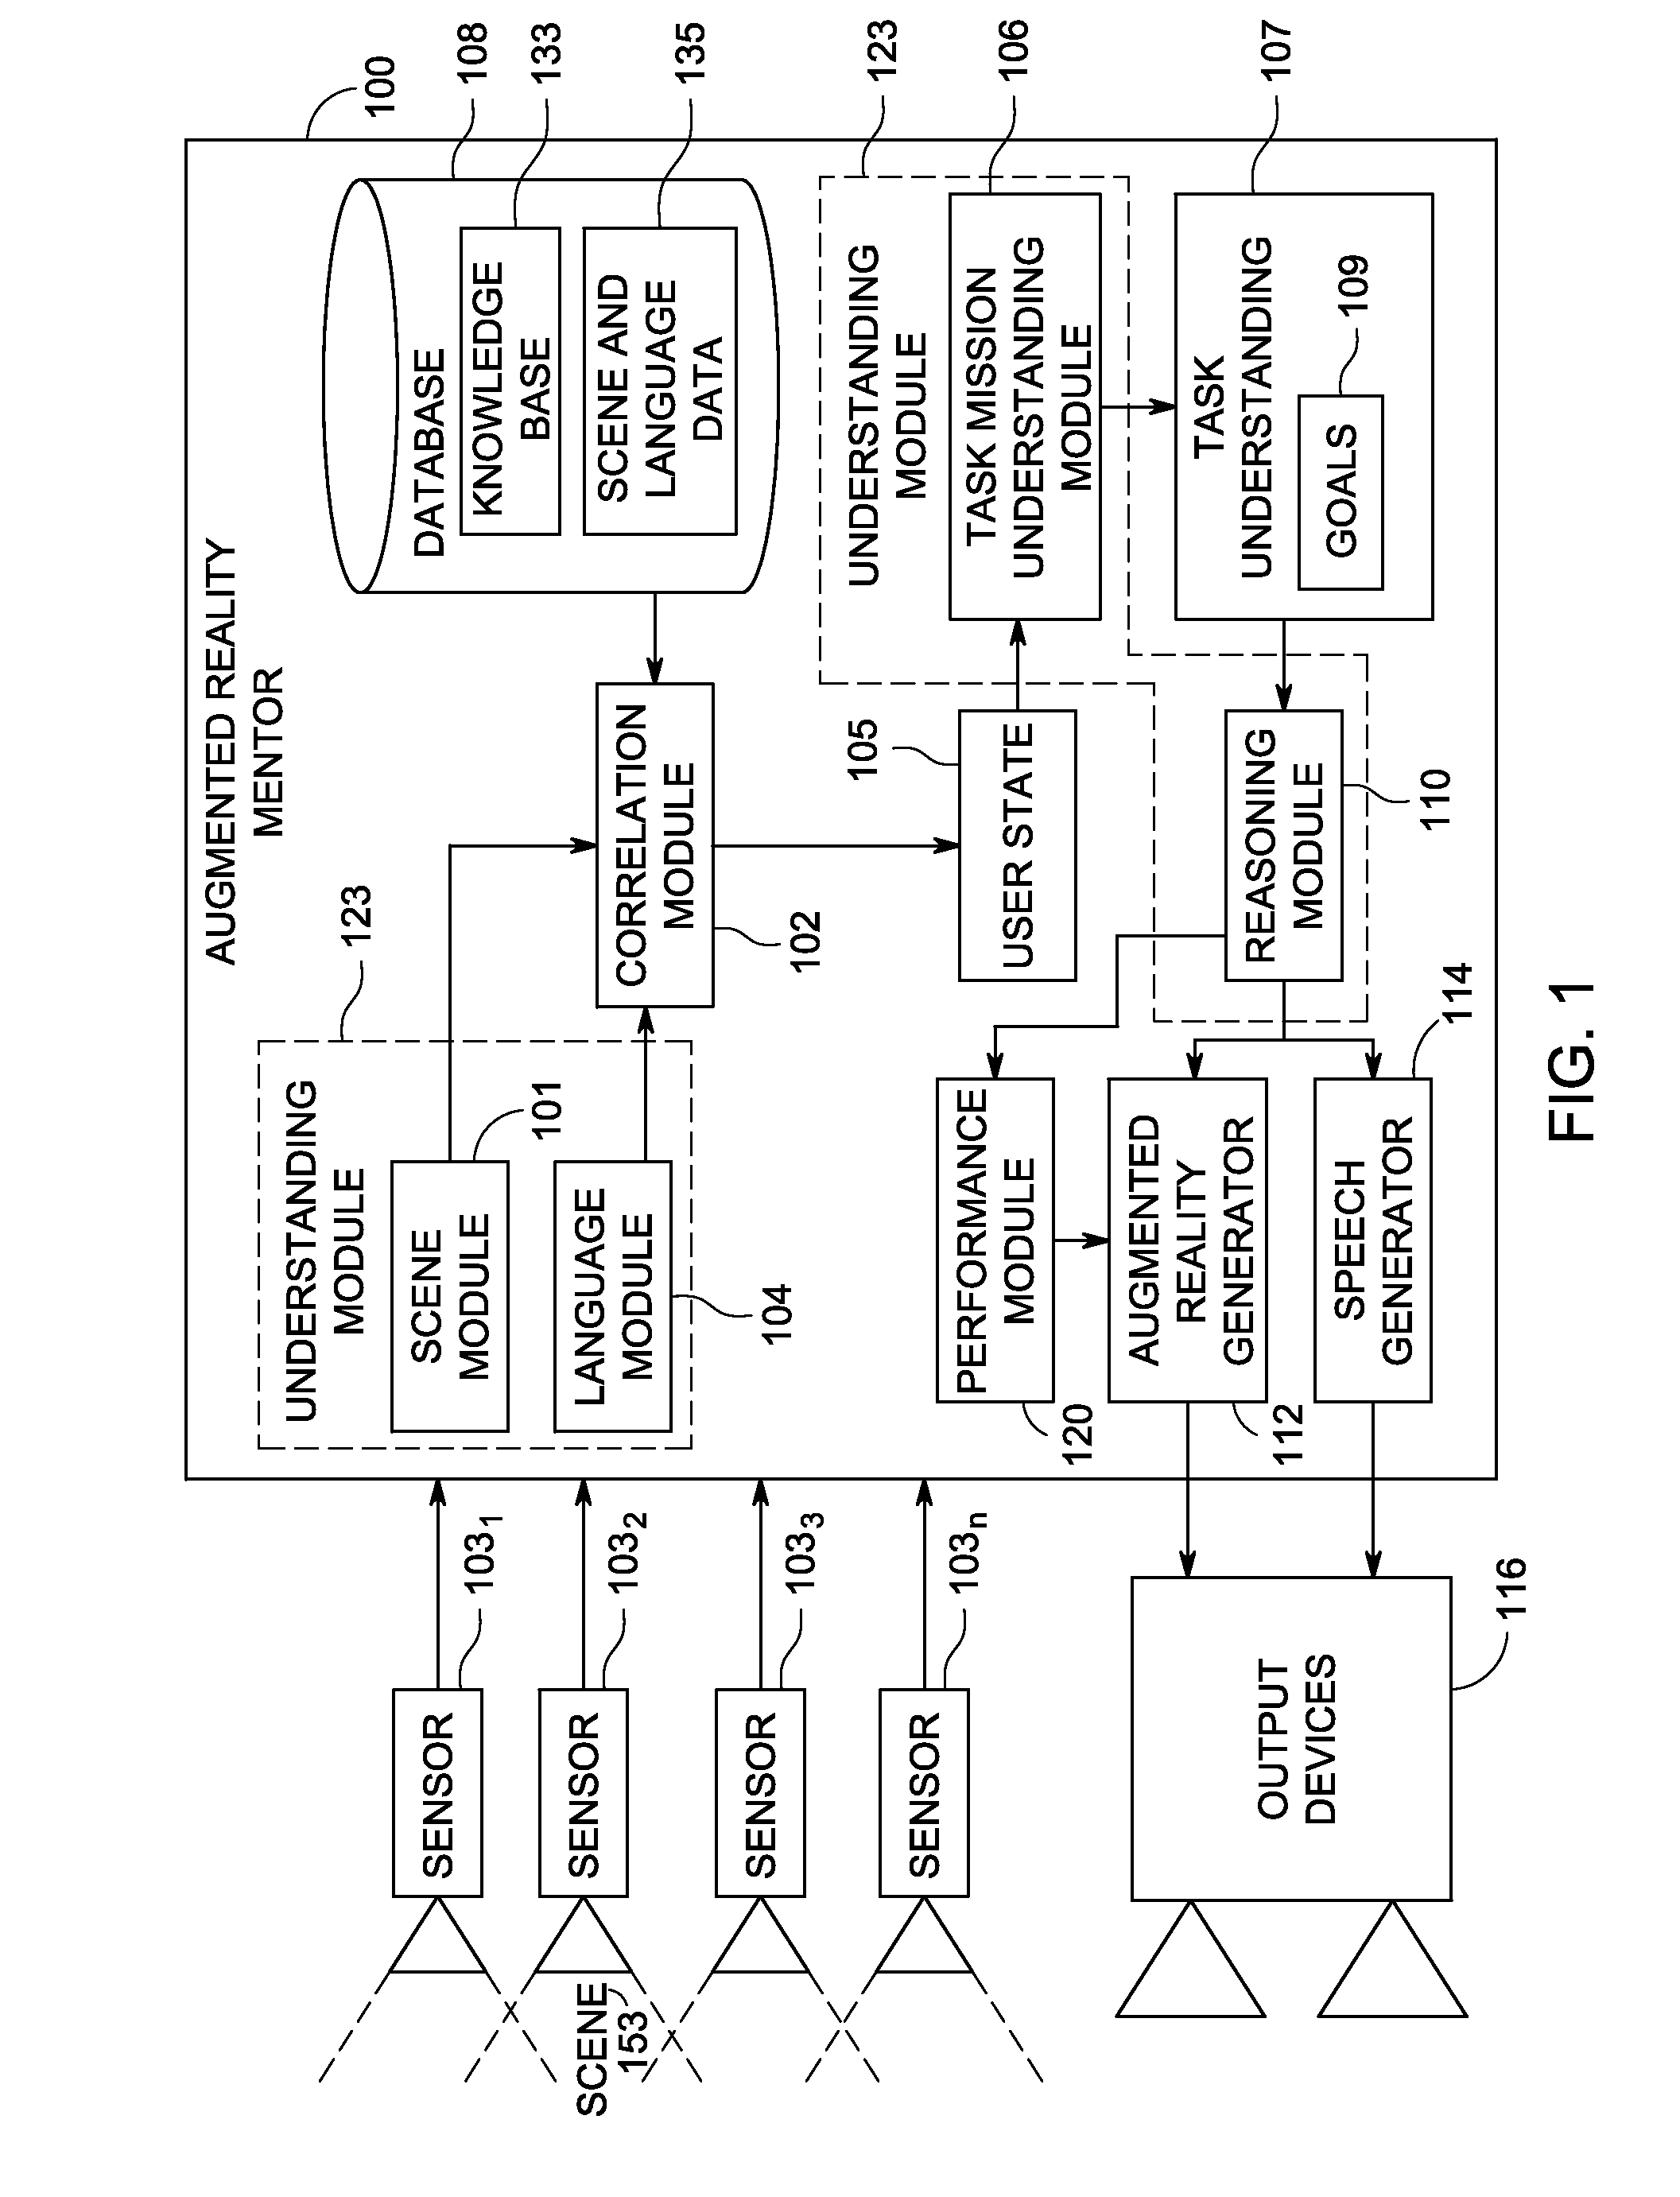 Method and apparatus for mentoring via an augmented reality assistant